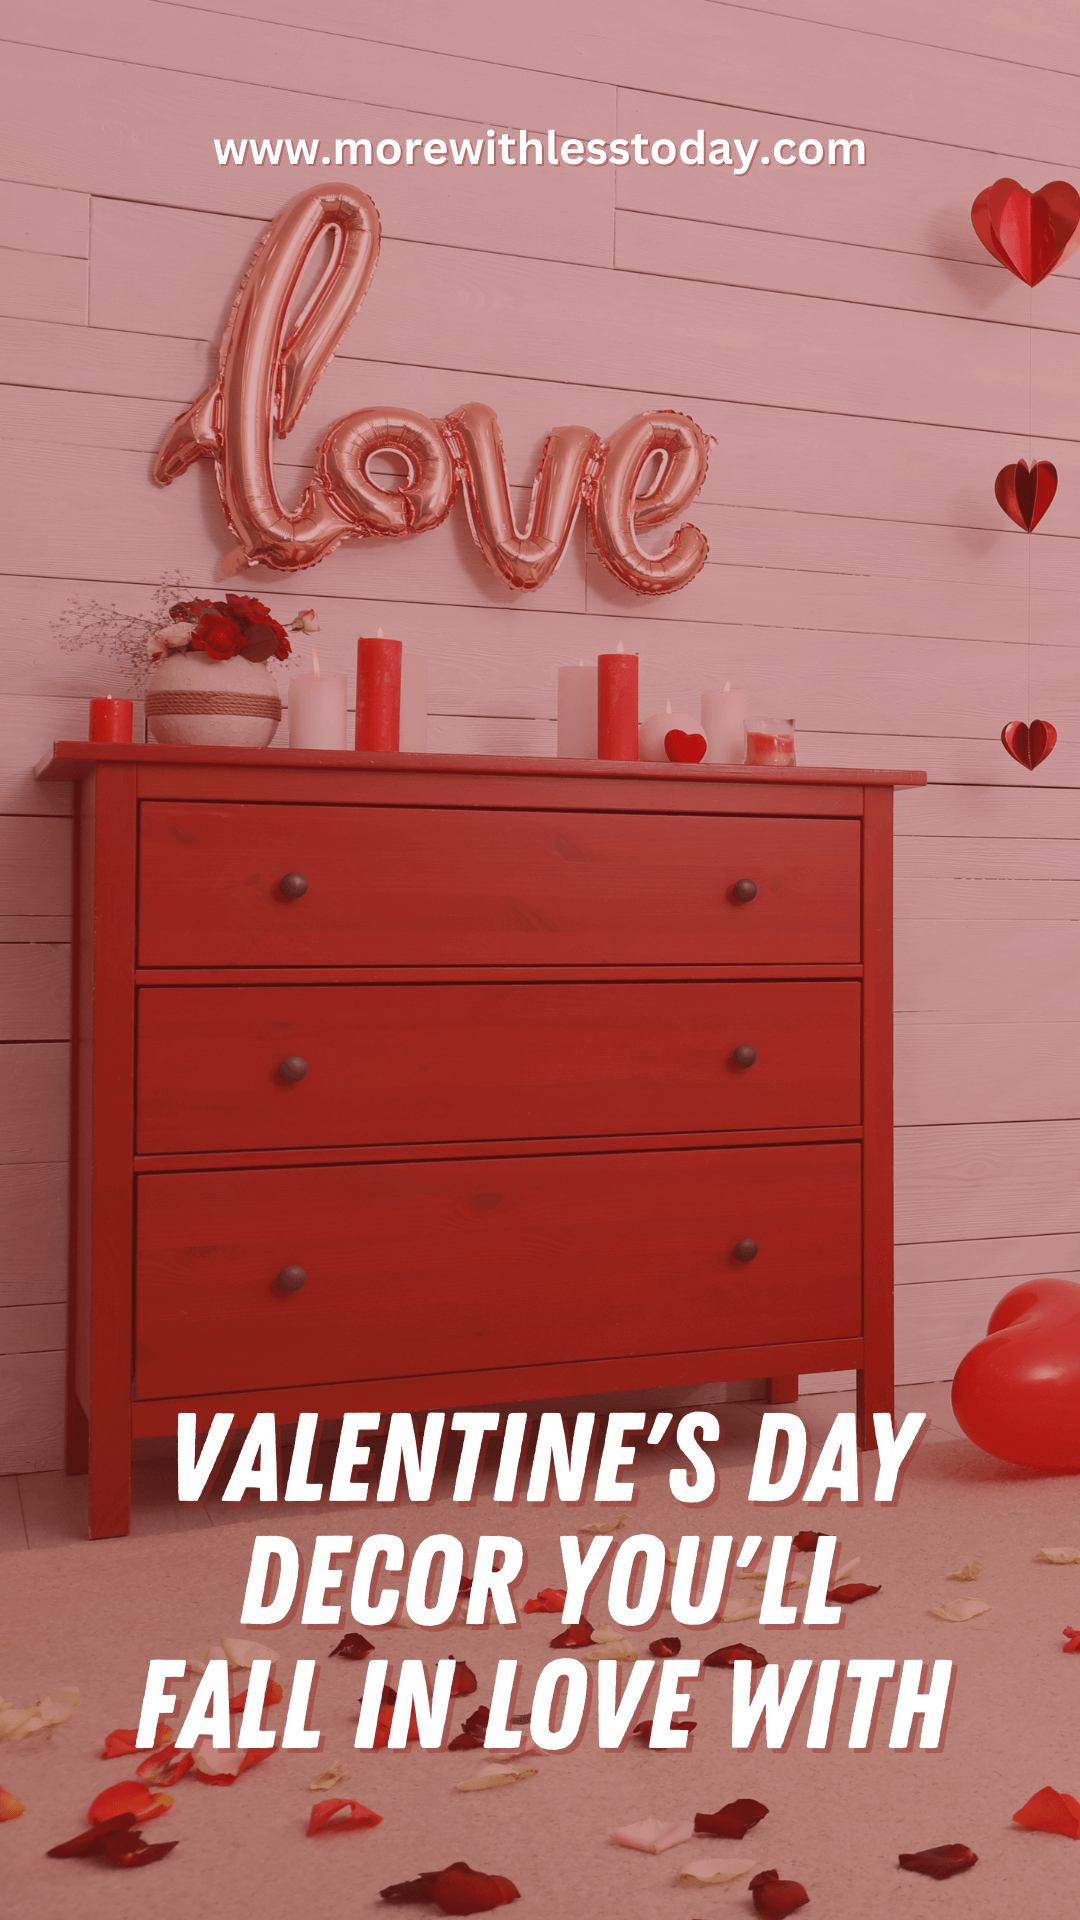 Valentine's Day Decor You'll Fall In Love With - PIN